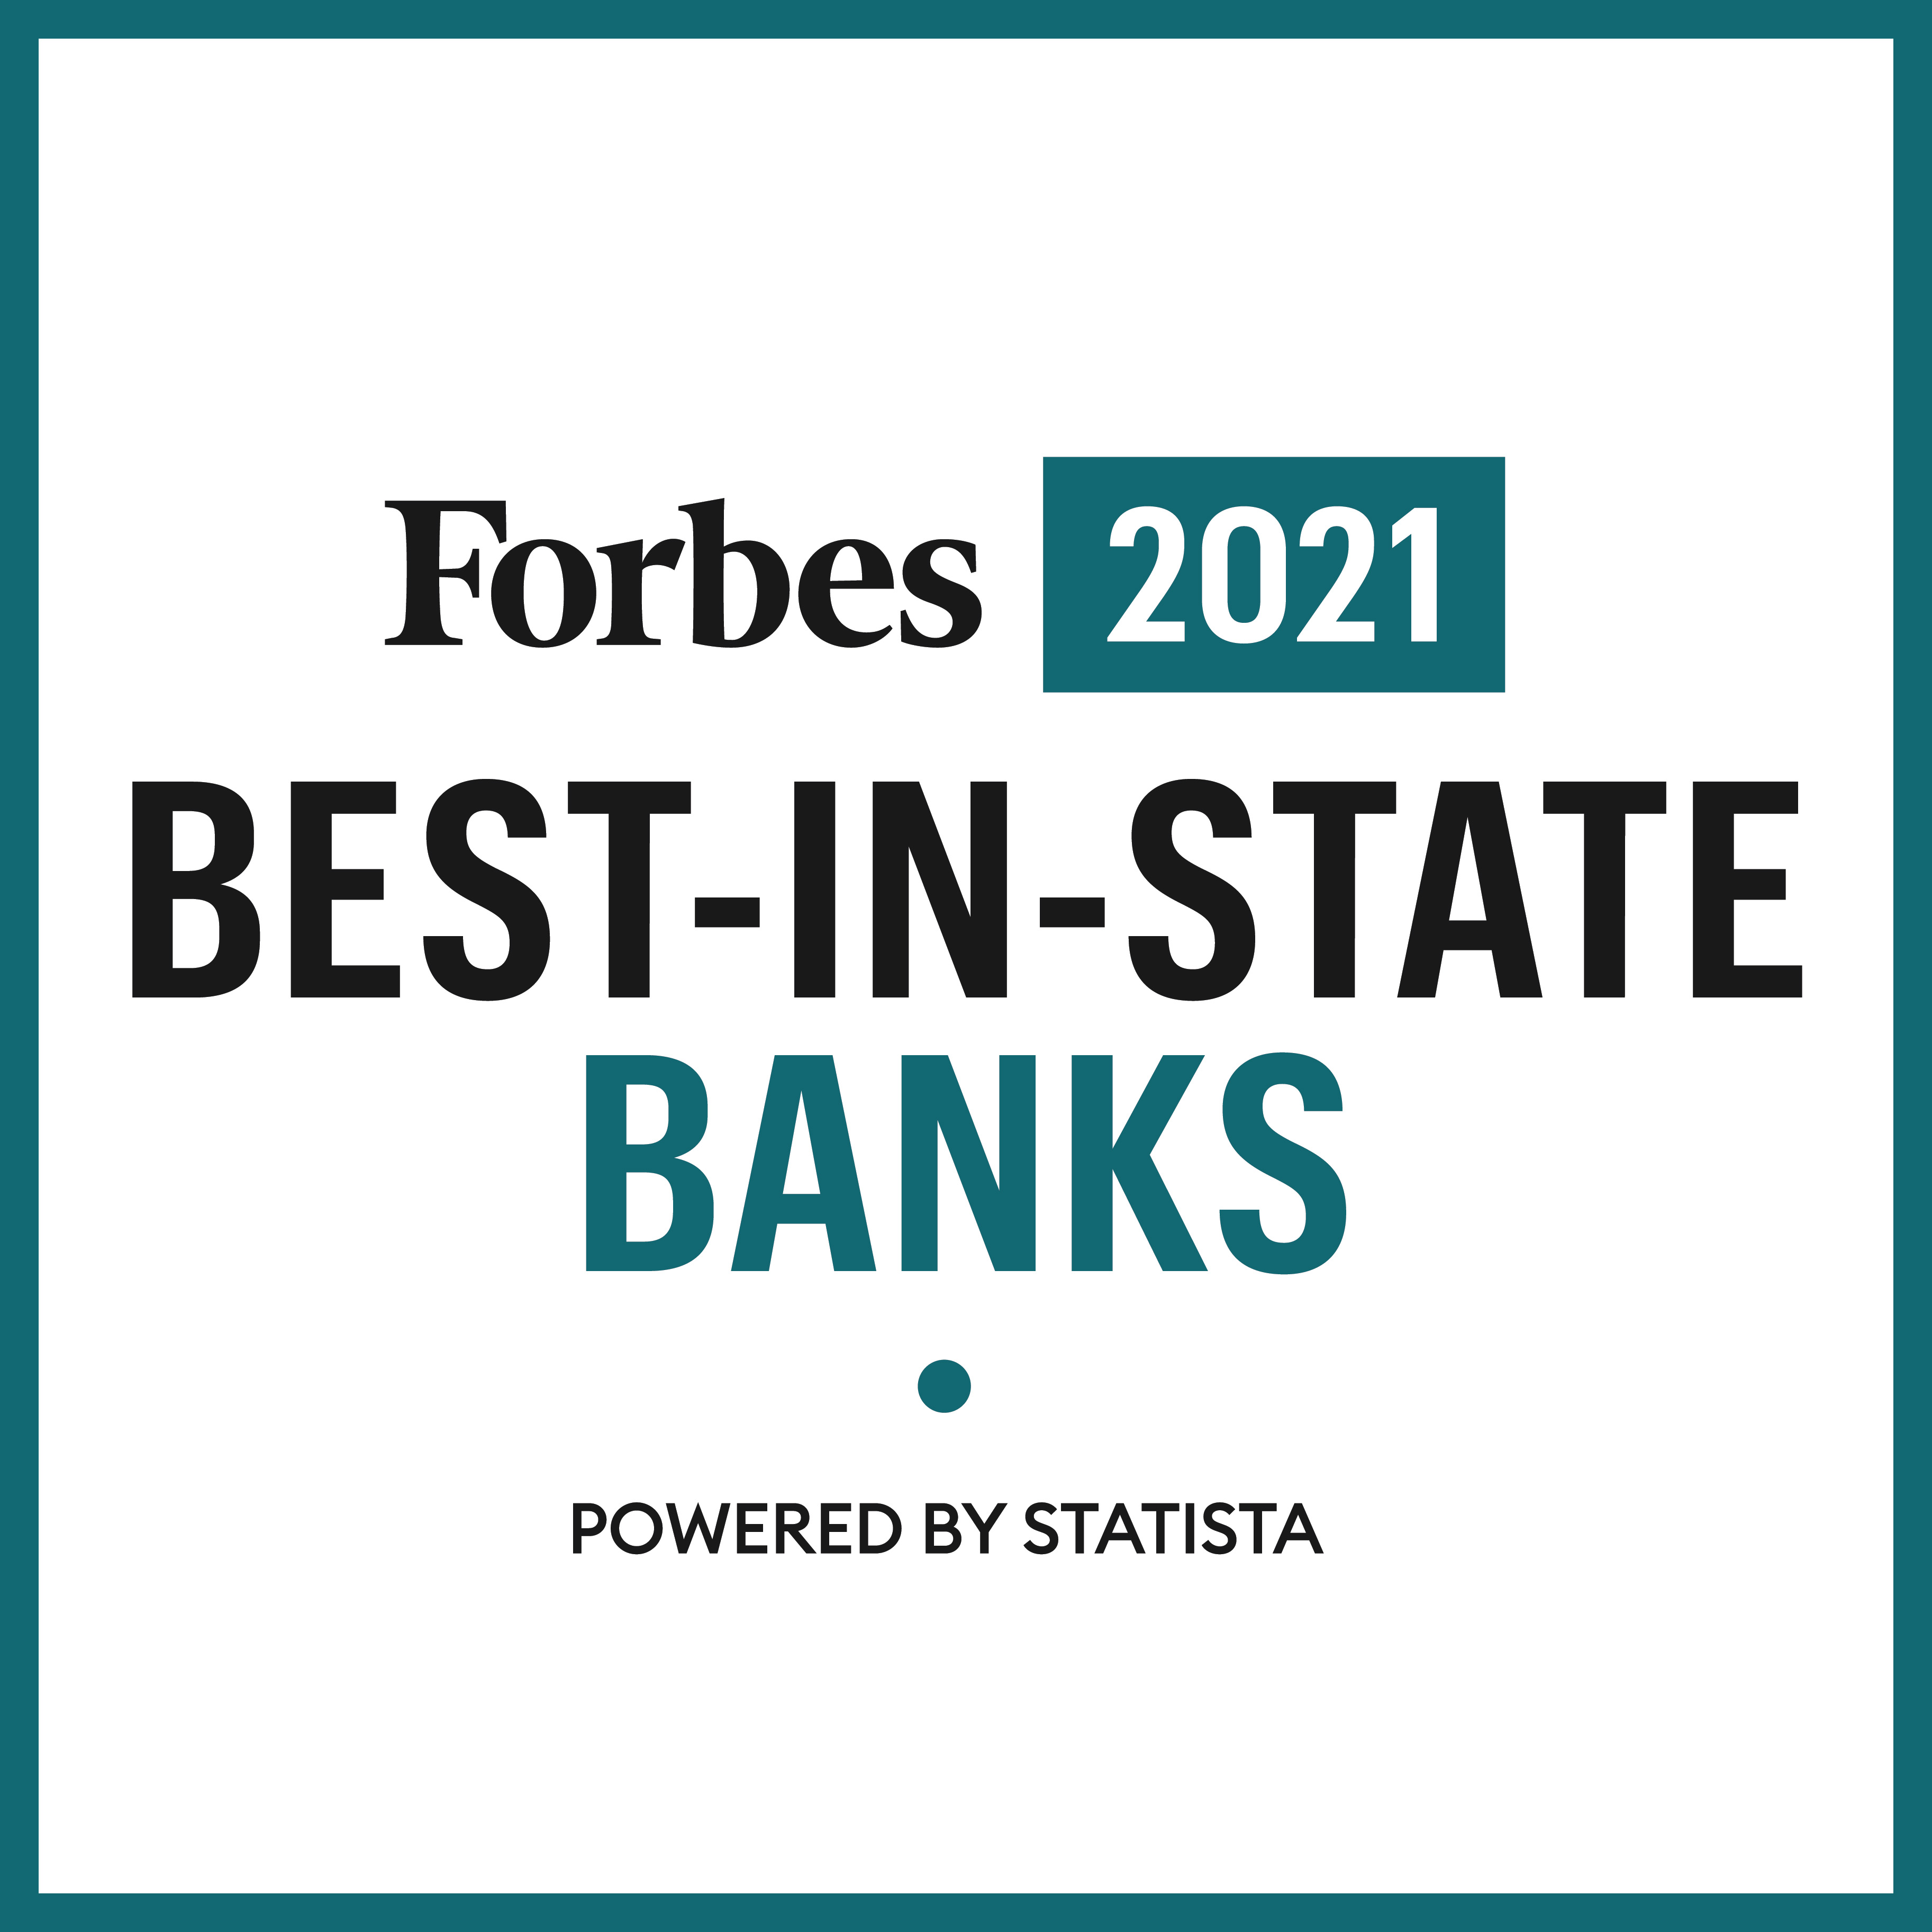 Forbes 2021 best in state banks logo